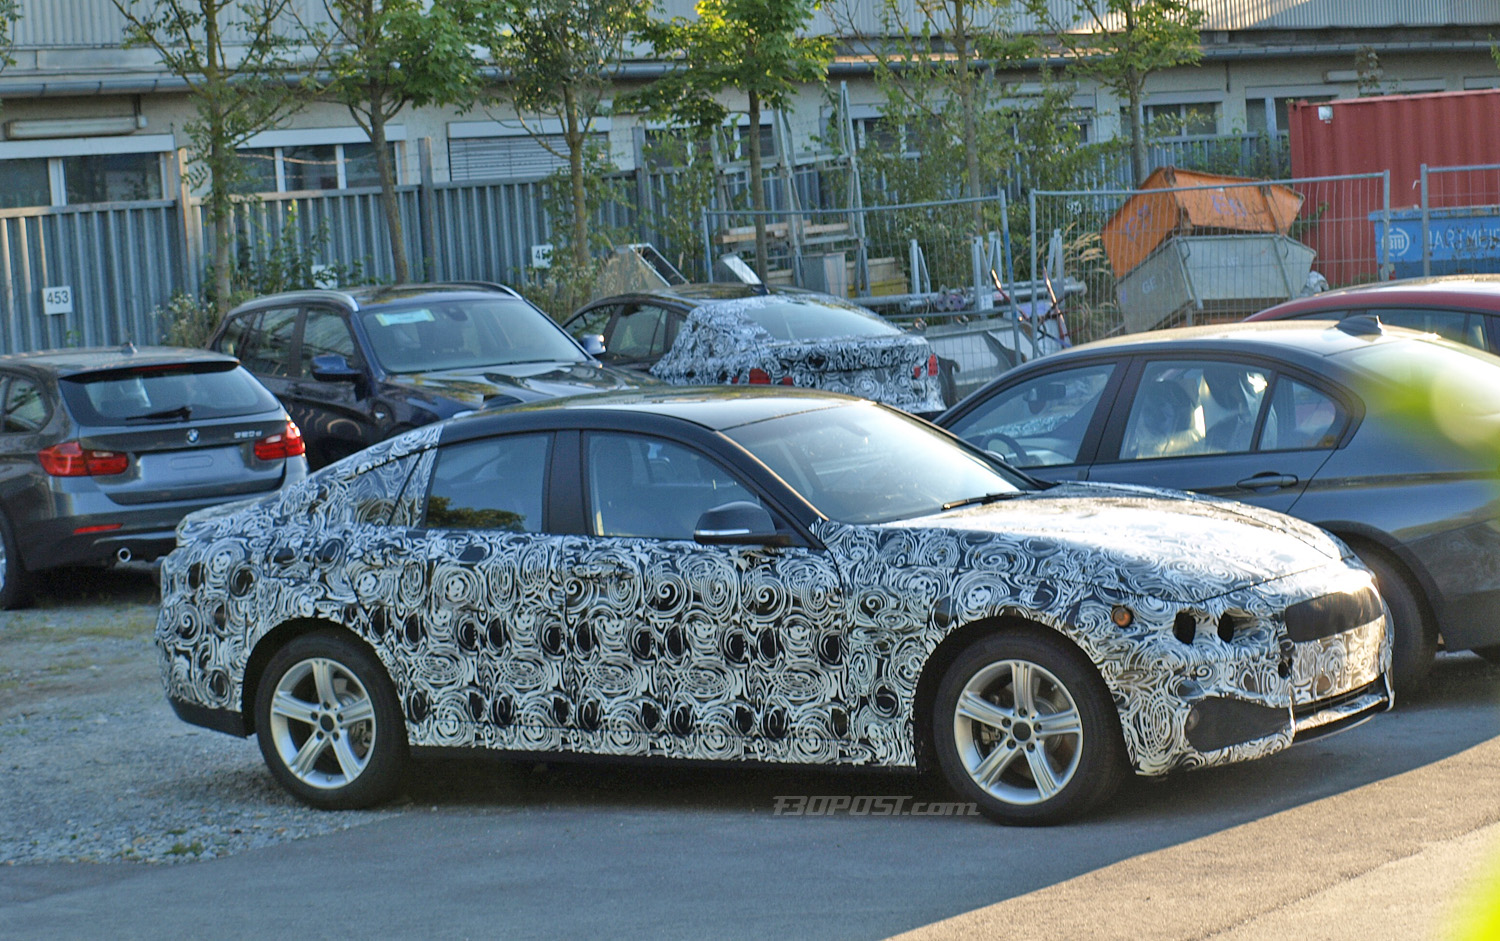 in 2014 to compete with the Audi A5 Sportback.